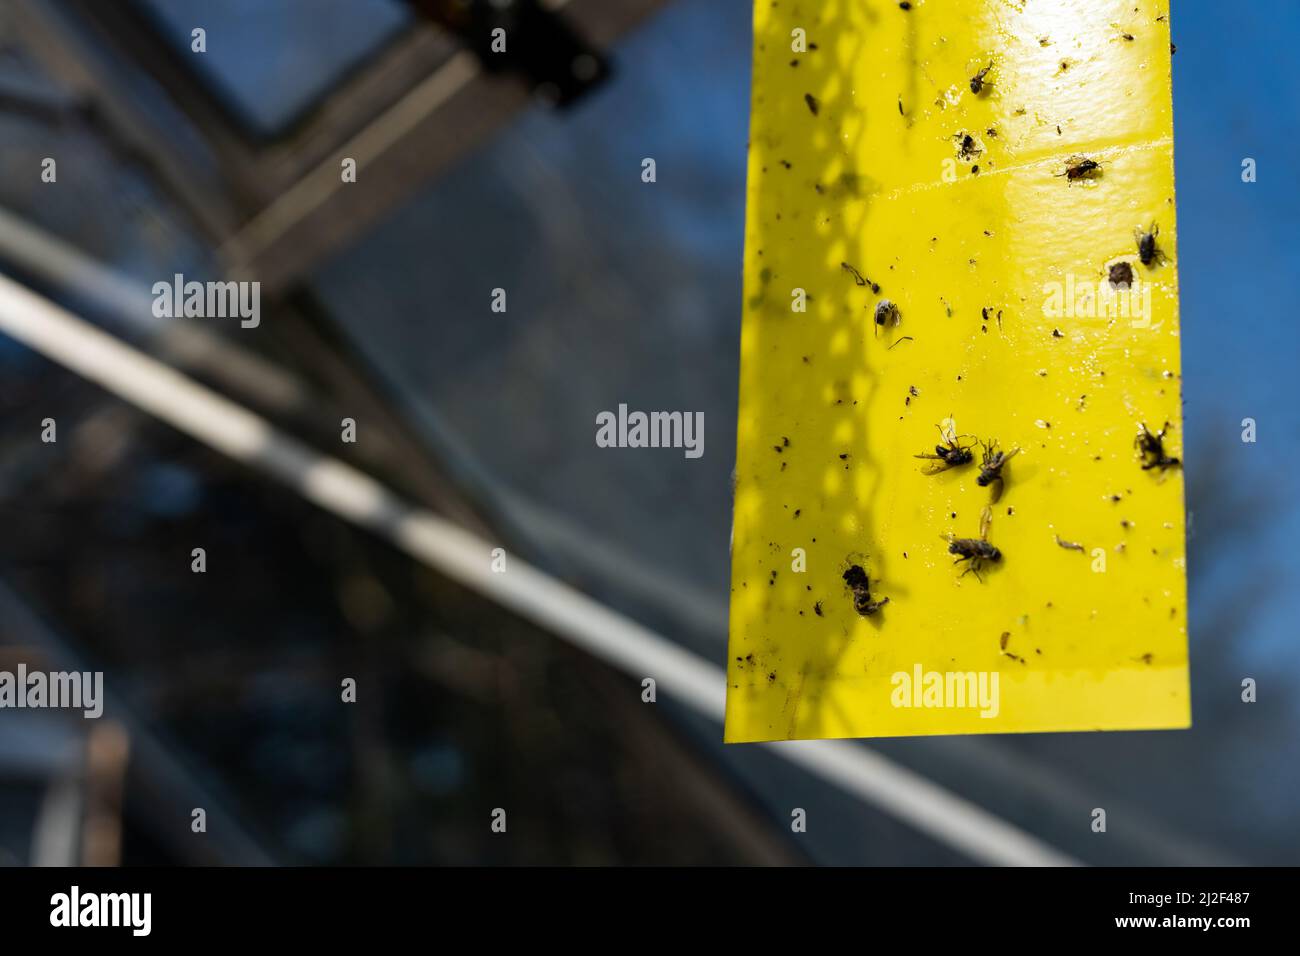 https://c8.alamy.com/comp/2J2F487/dead-flies-stuck-on-a-piece-of-flypaper-hanging-from-the-roof-of-a-greenhouse-it-is-being-used-to-protect-the-vegetables-that-are-being-grown-at-home-2J2F487.jpg